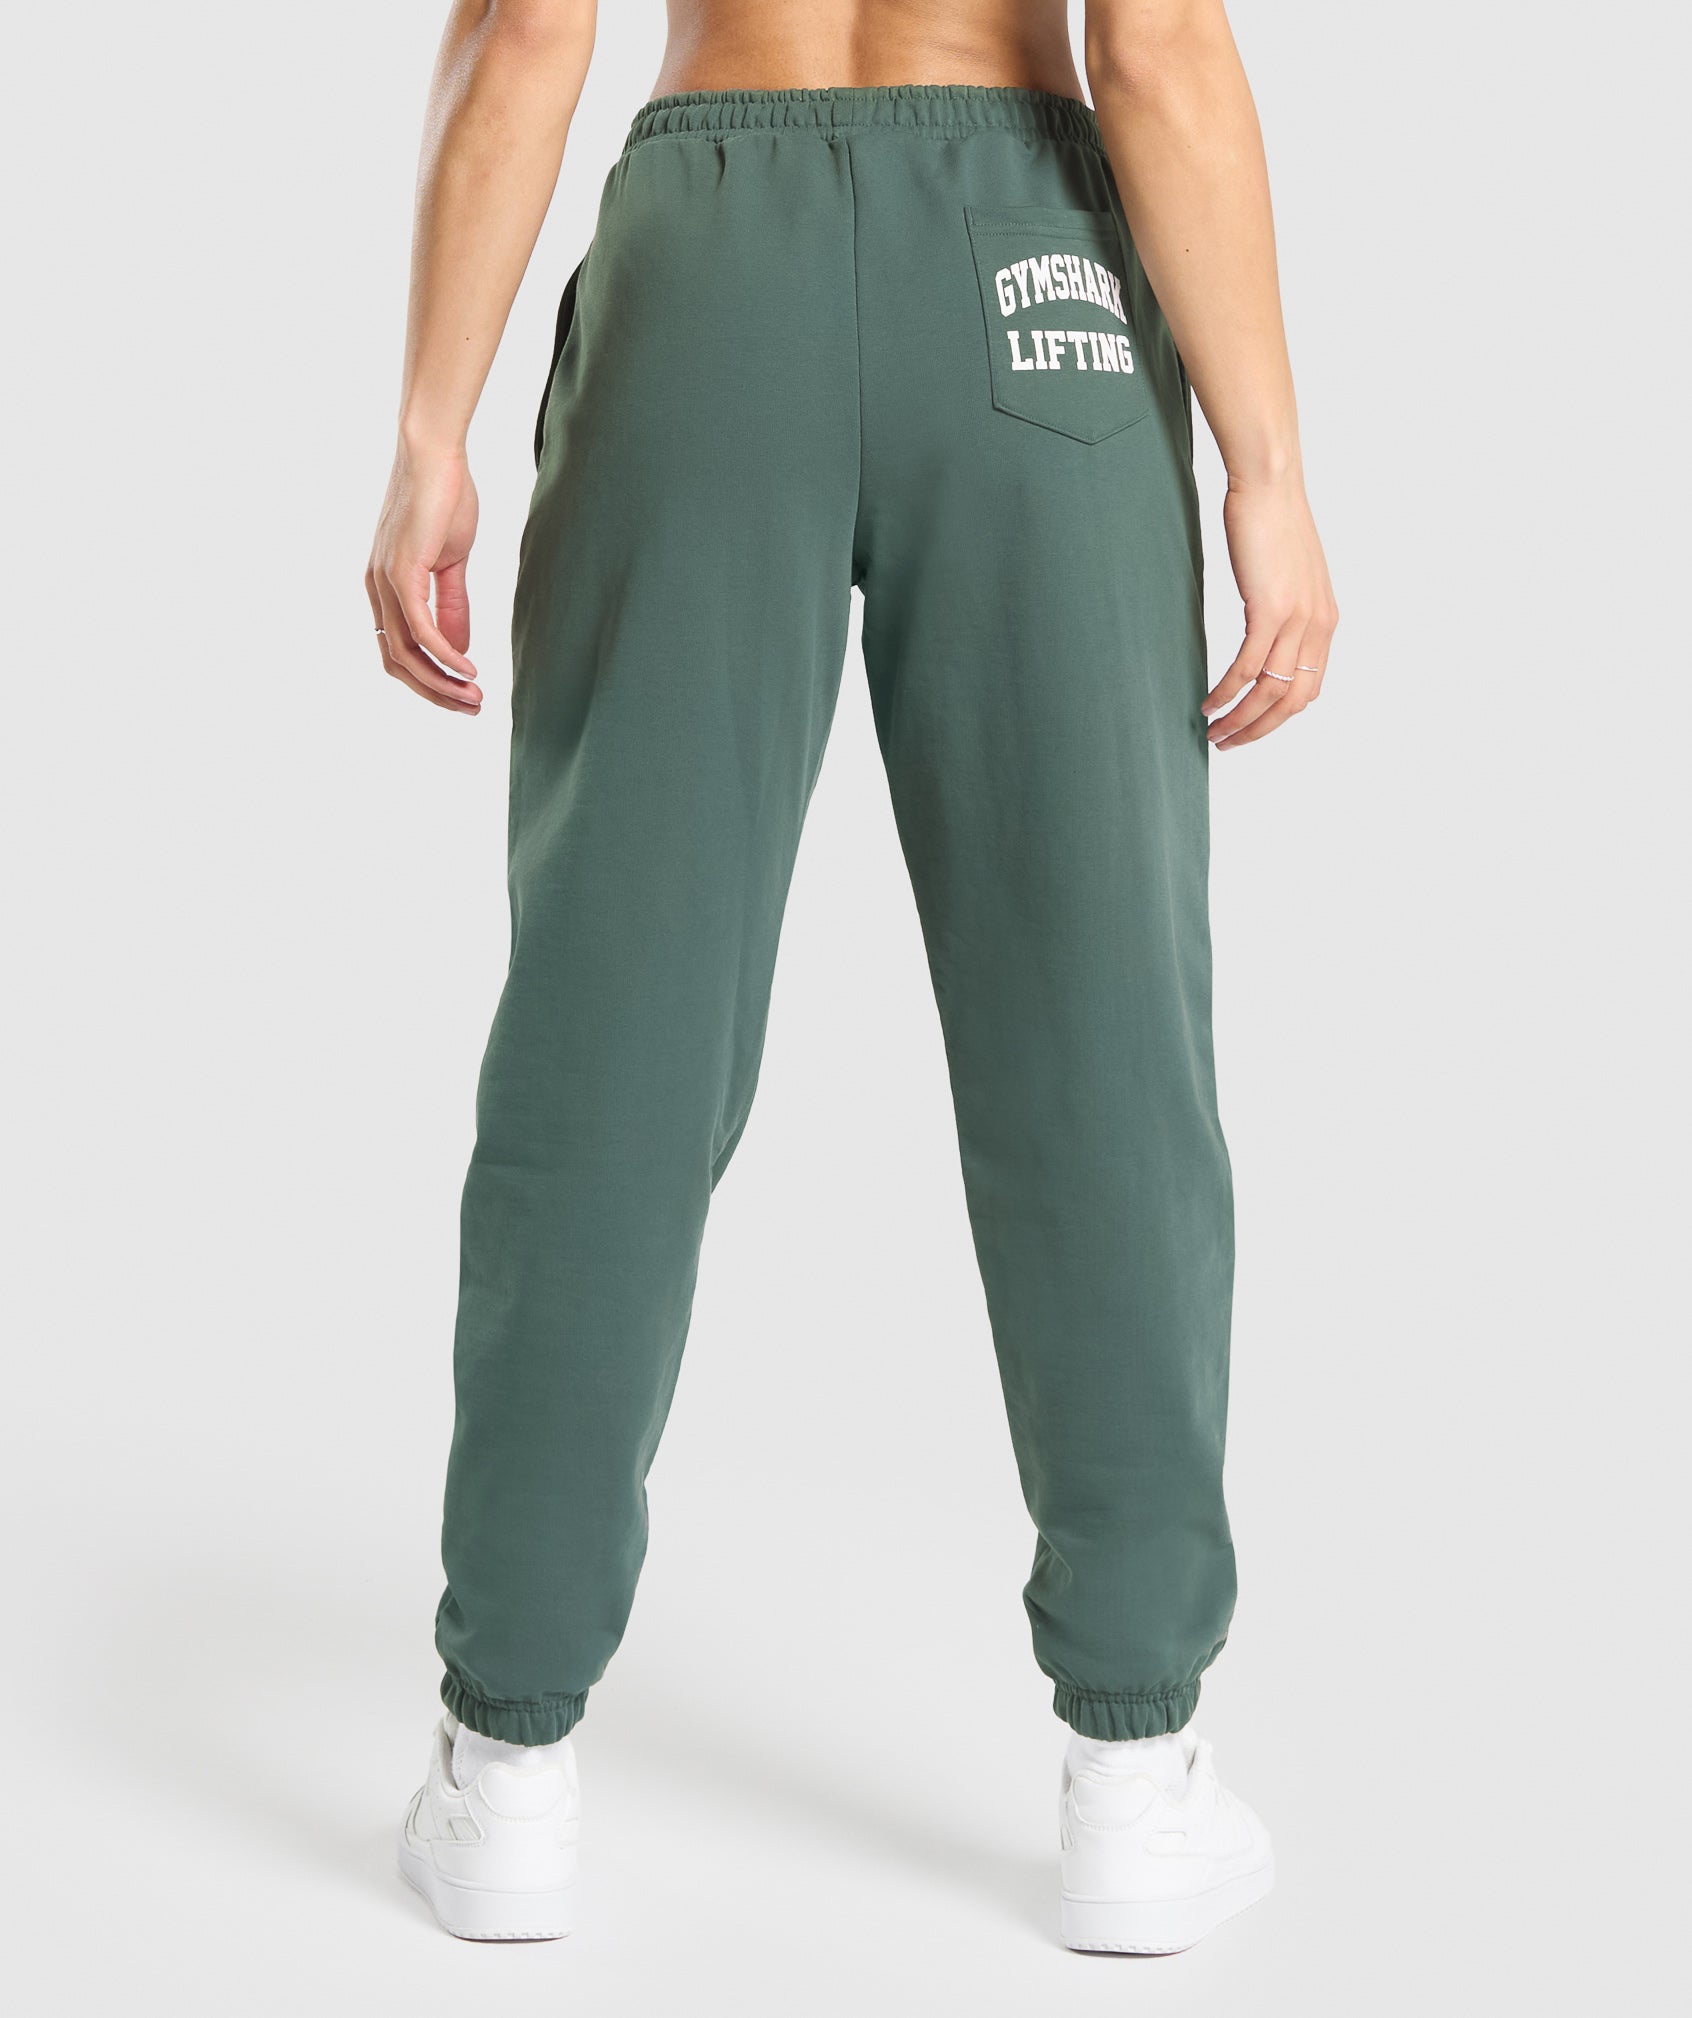 Lifting Graphic Oversized Joggers in Slate Teal